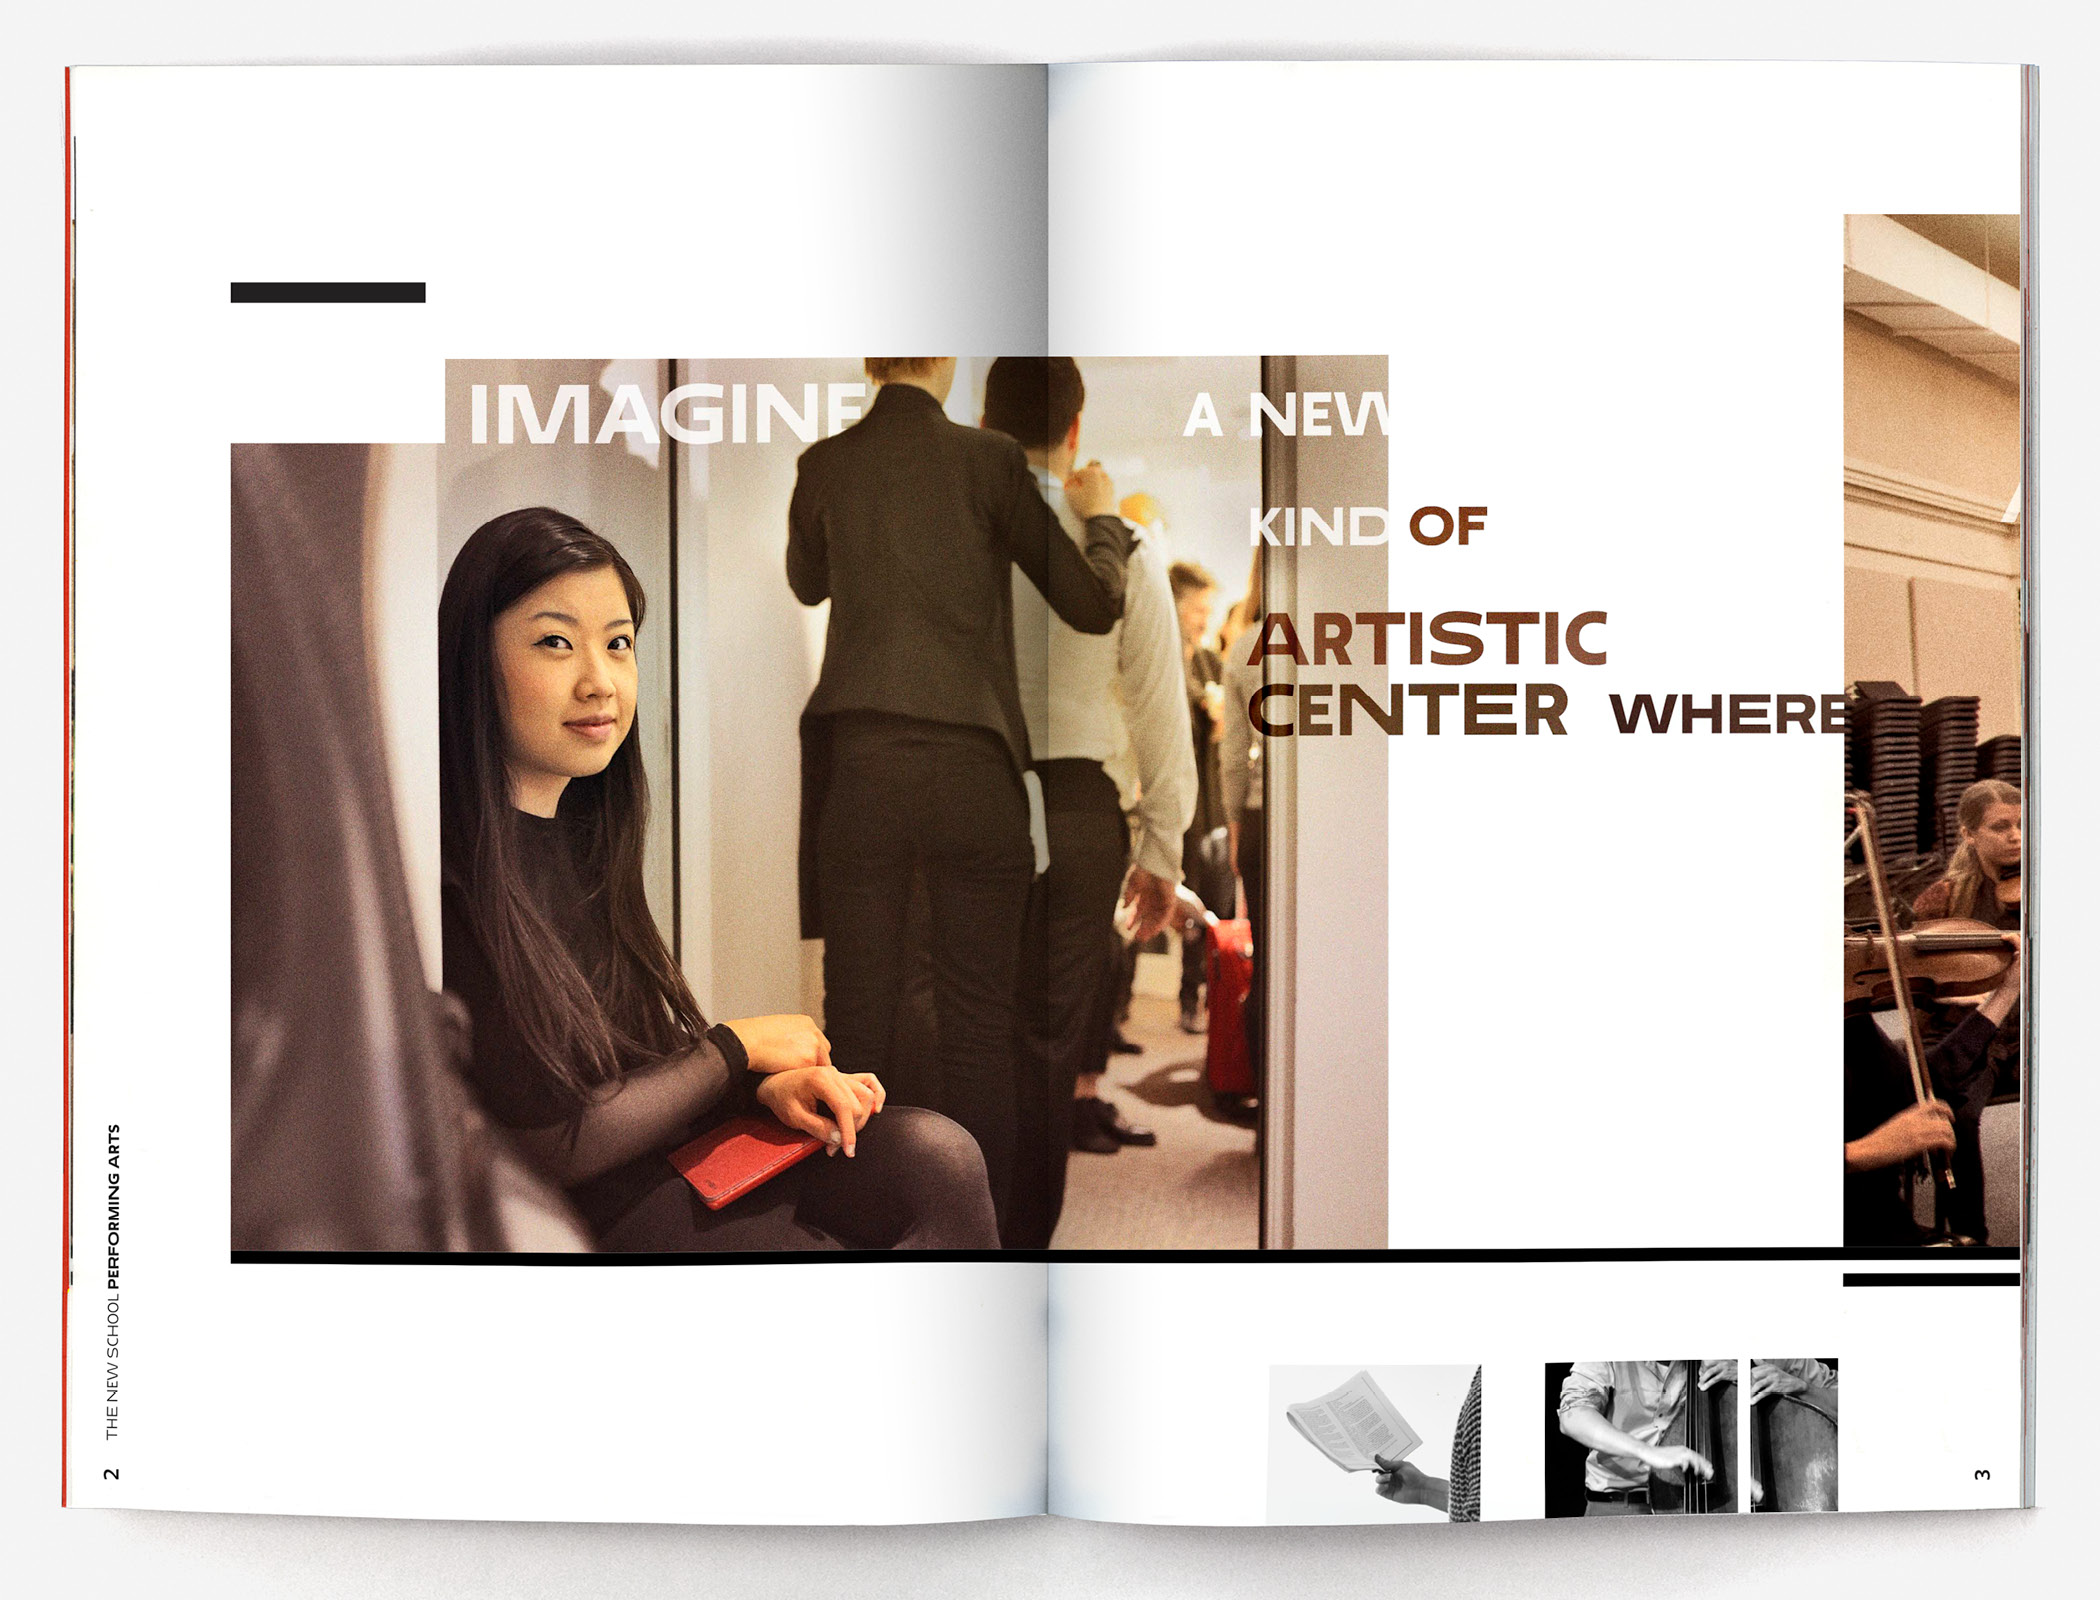 Spread from brochure that says "Imagine a new kind of artistic center where"